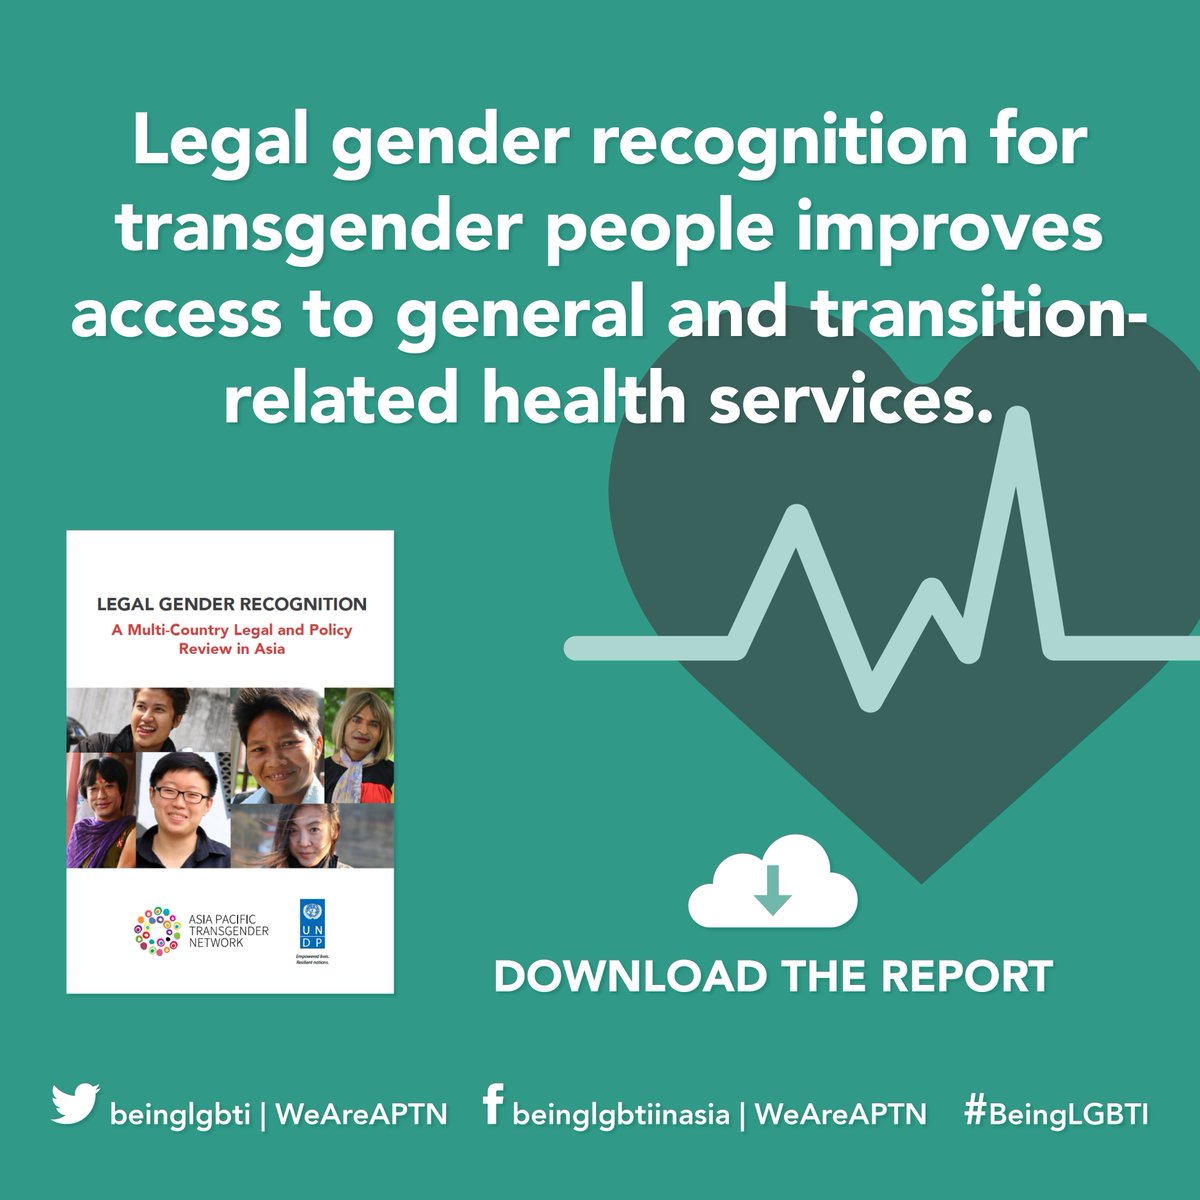 Few countries in #Asia-Pacific have adopted progressive #health standards that are sensitive to #transgender people's needs & rights. Read about how #LegalGenderRecognition can impact the health of #trans people in our new report: asia-pacific.undp.org/content/rbap/e… #BeingLGBTI #ILGAAsia17